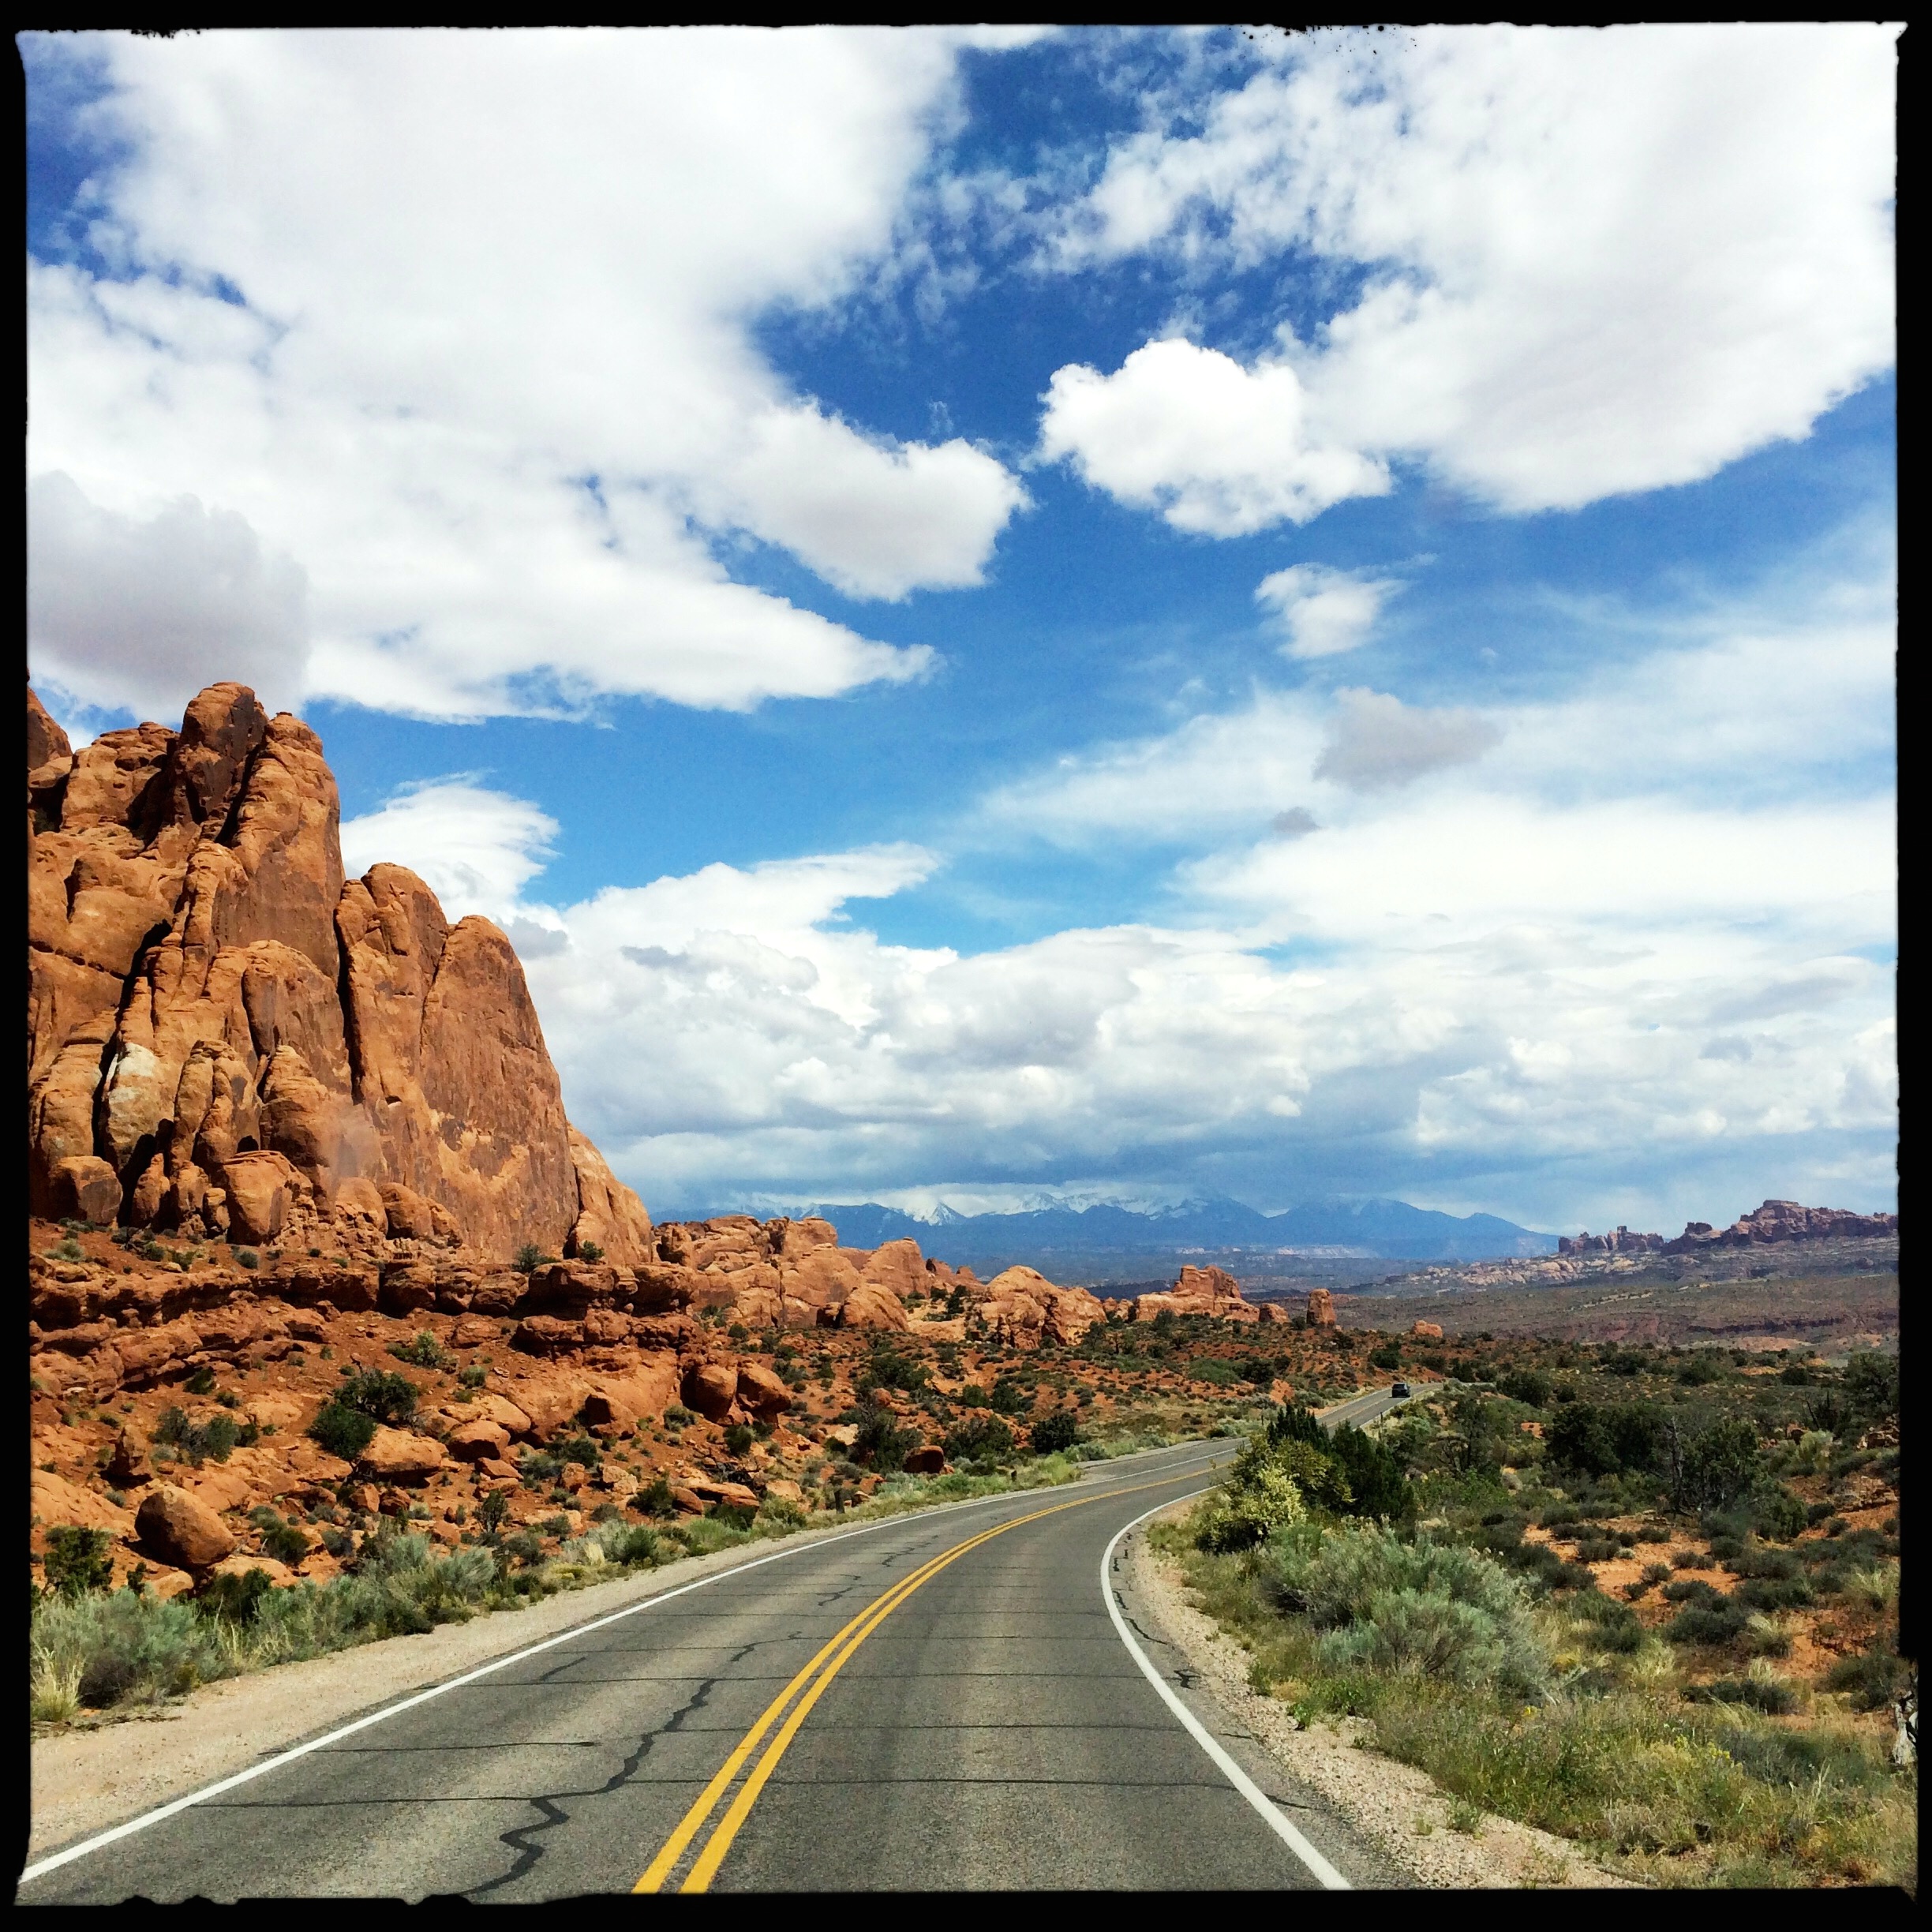 Driving through Arches National Park.